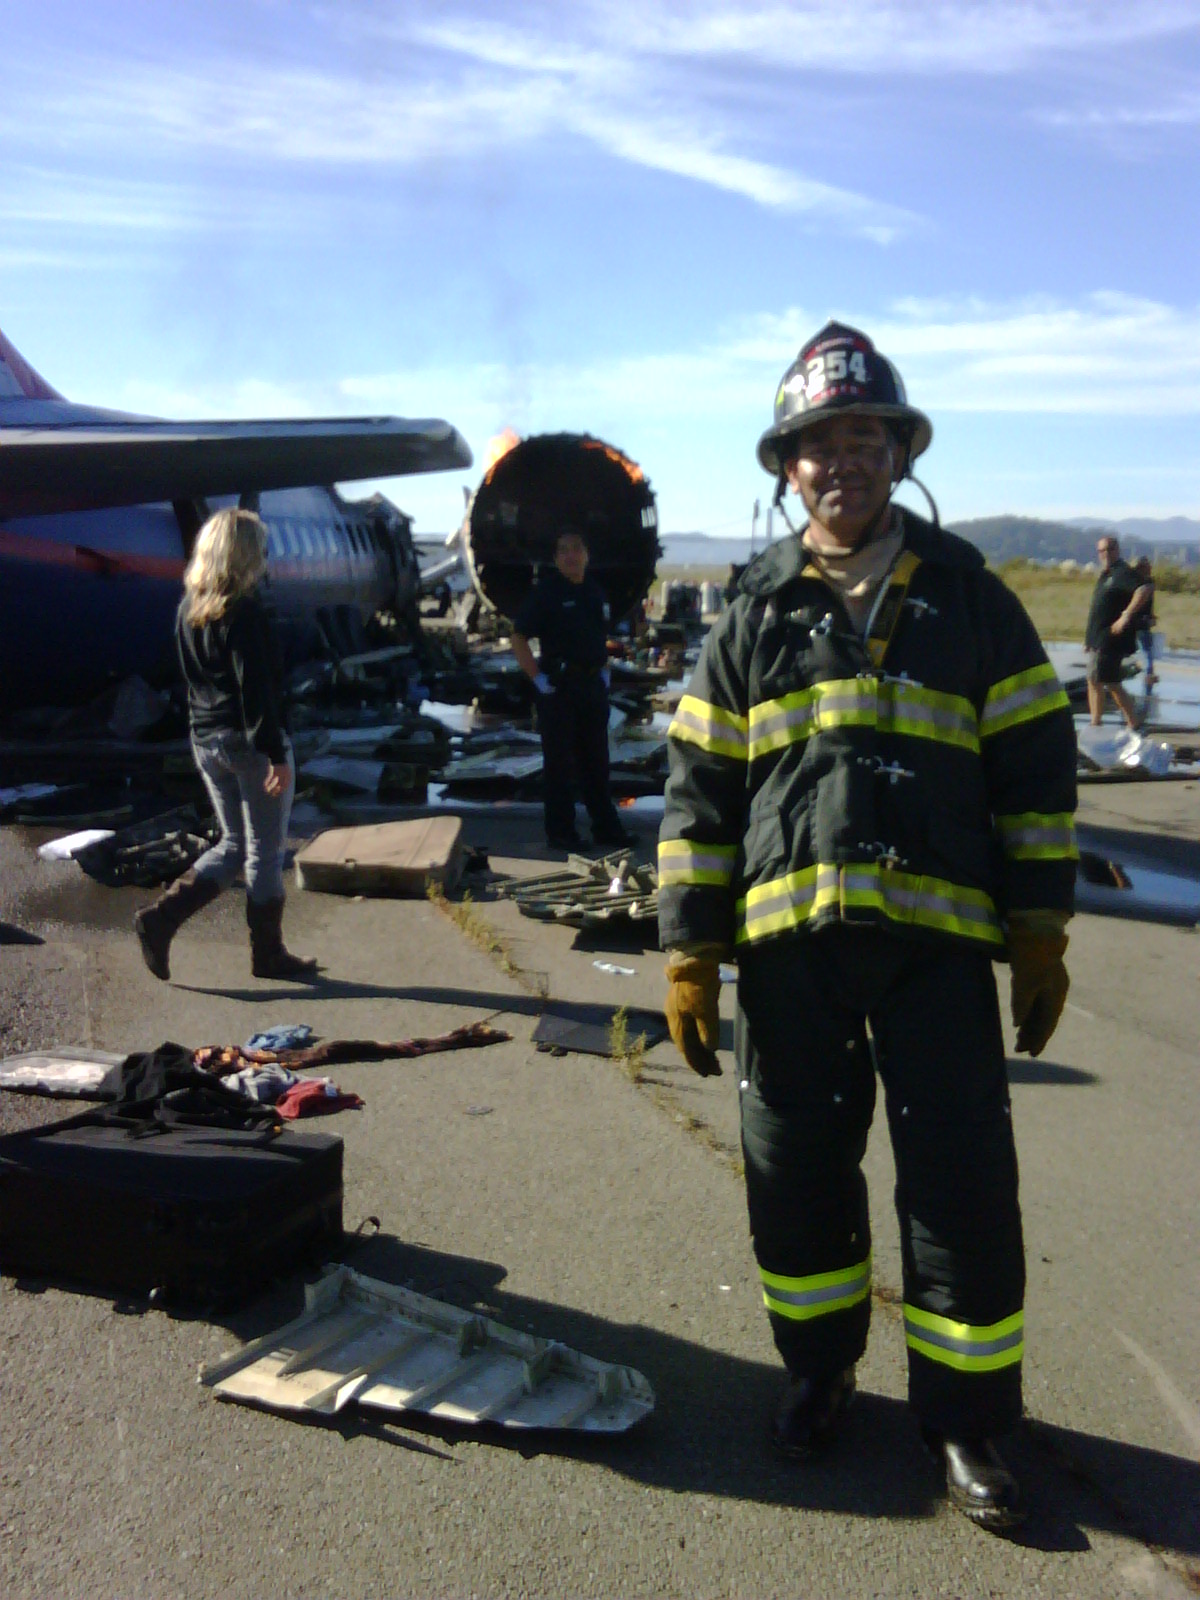 Trauma - Episode 9 - Fire Fighter Between Scenes at Plane Wreckage